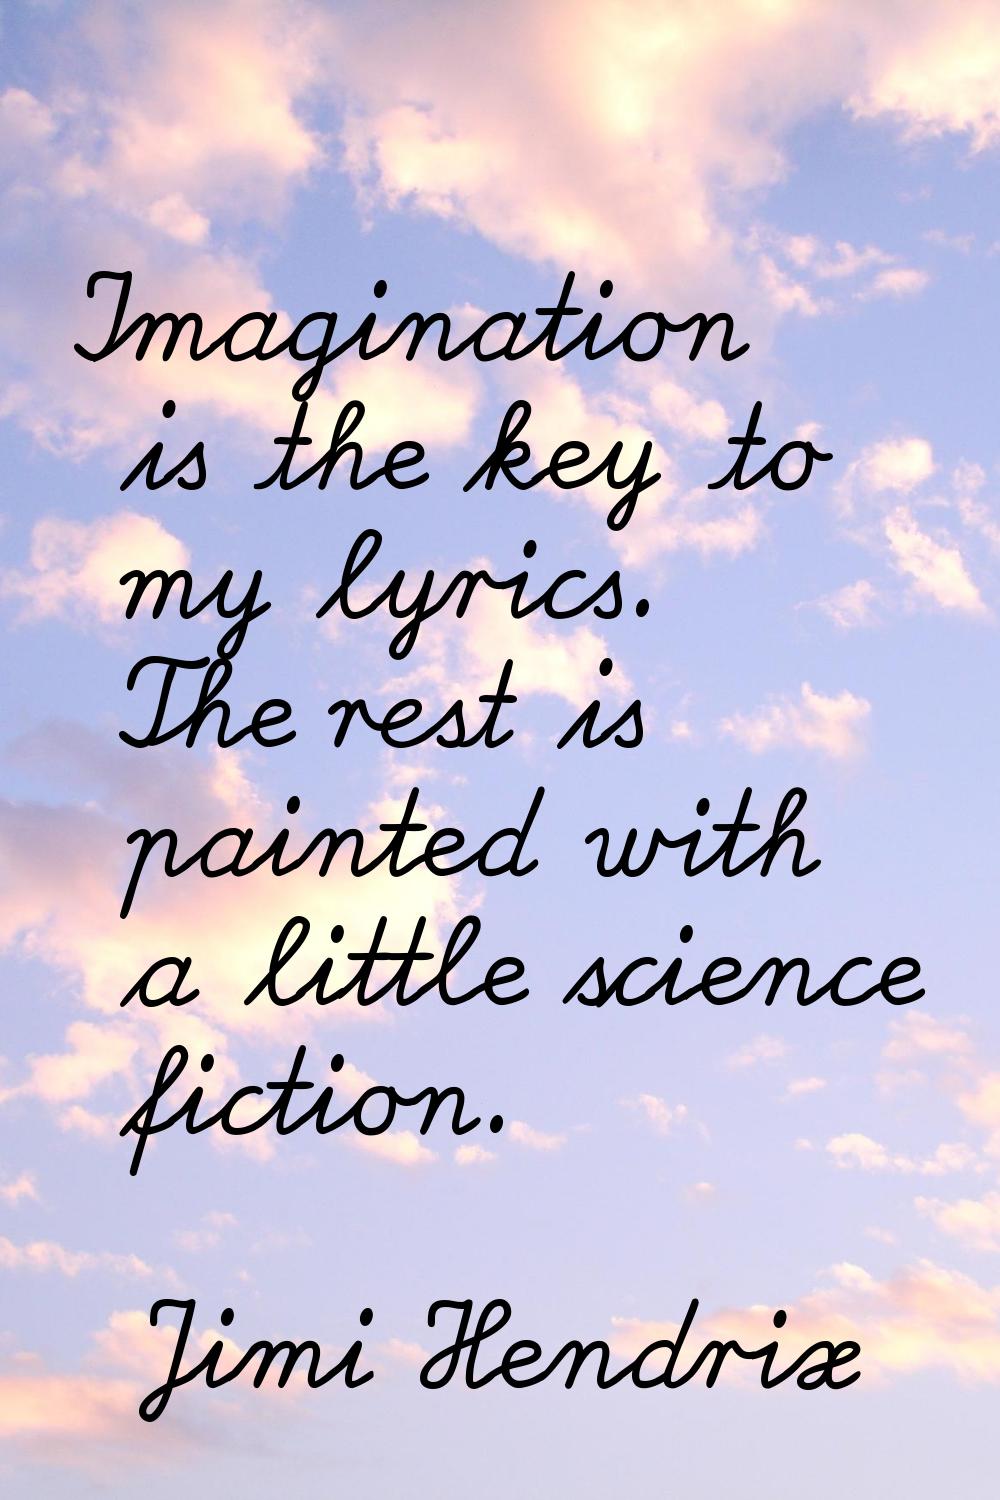 Imagination is the key to my lyrics. The rest is painted with a little science fiction.